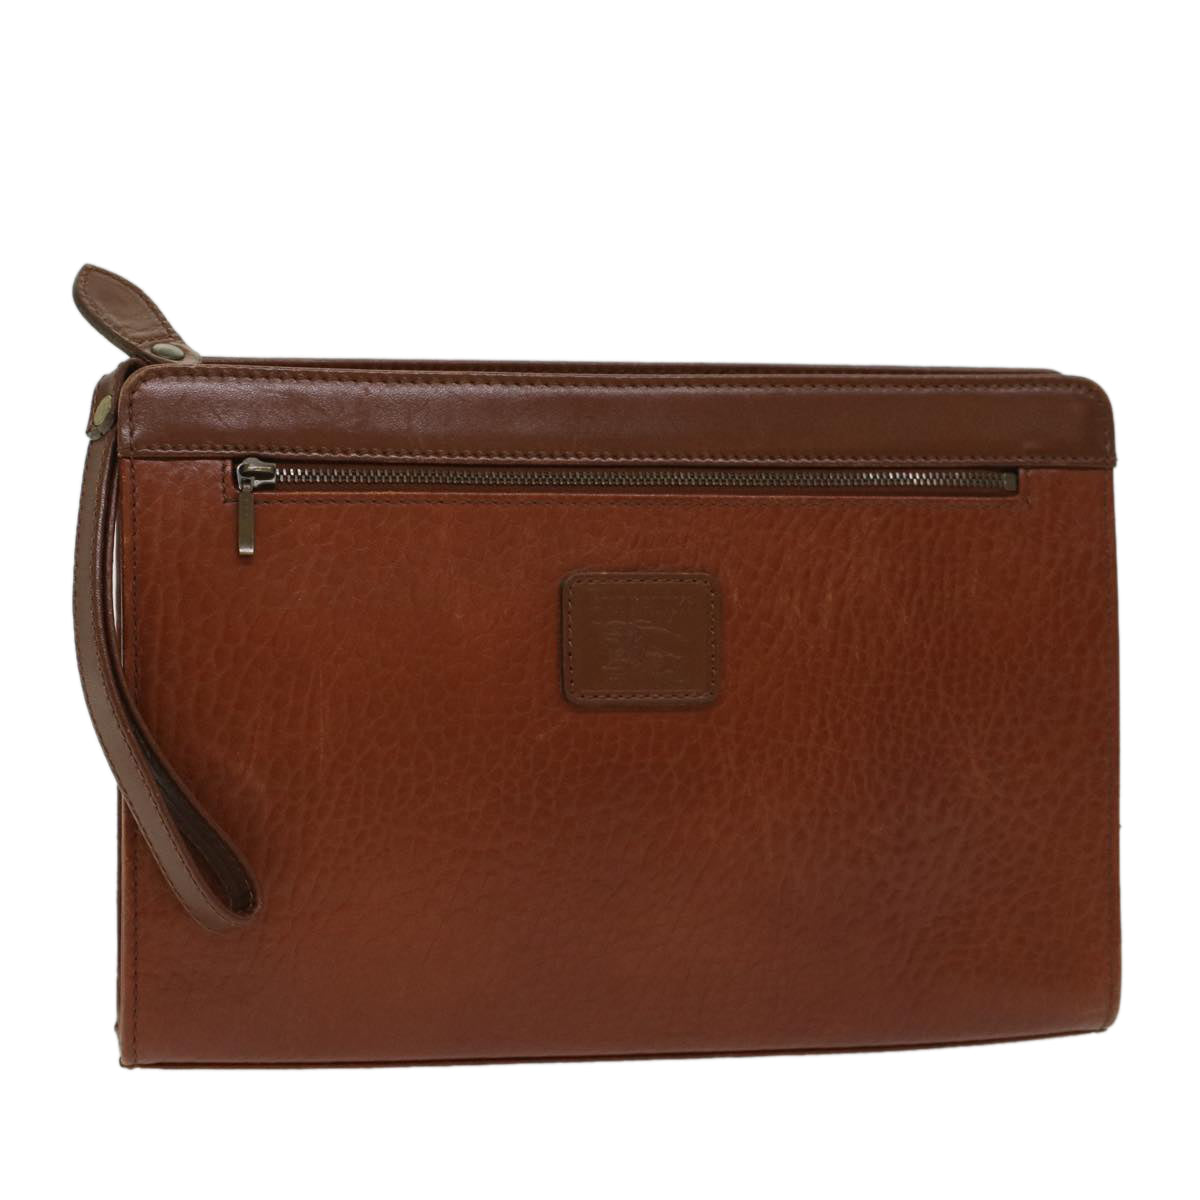 Burberrys Clutch Bag Leather Brown Auth yk7778